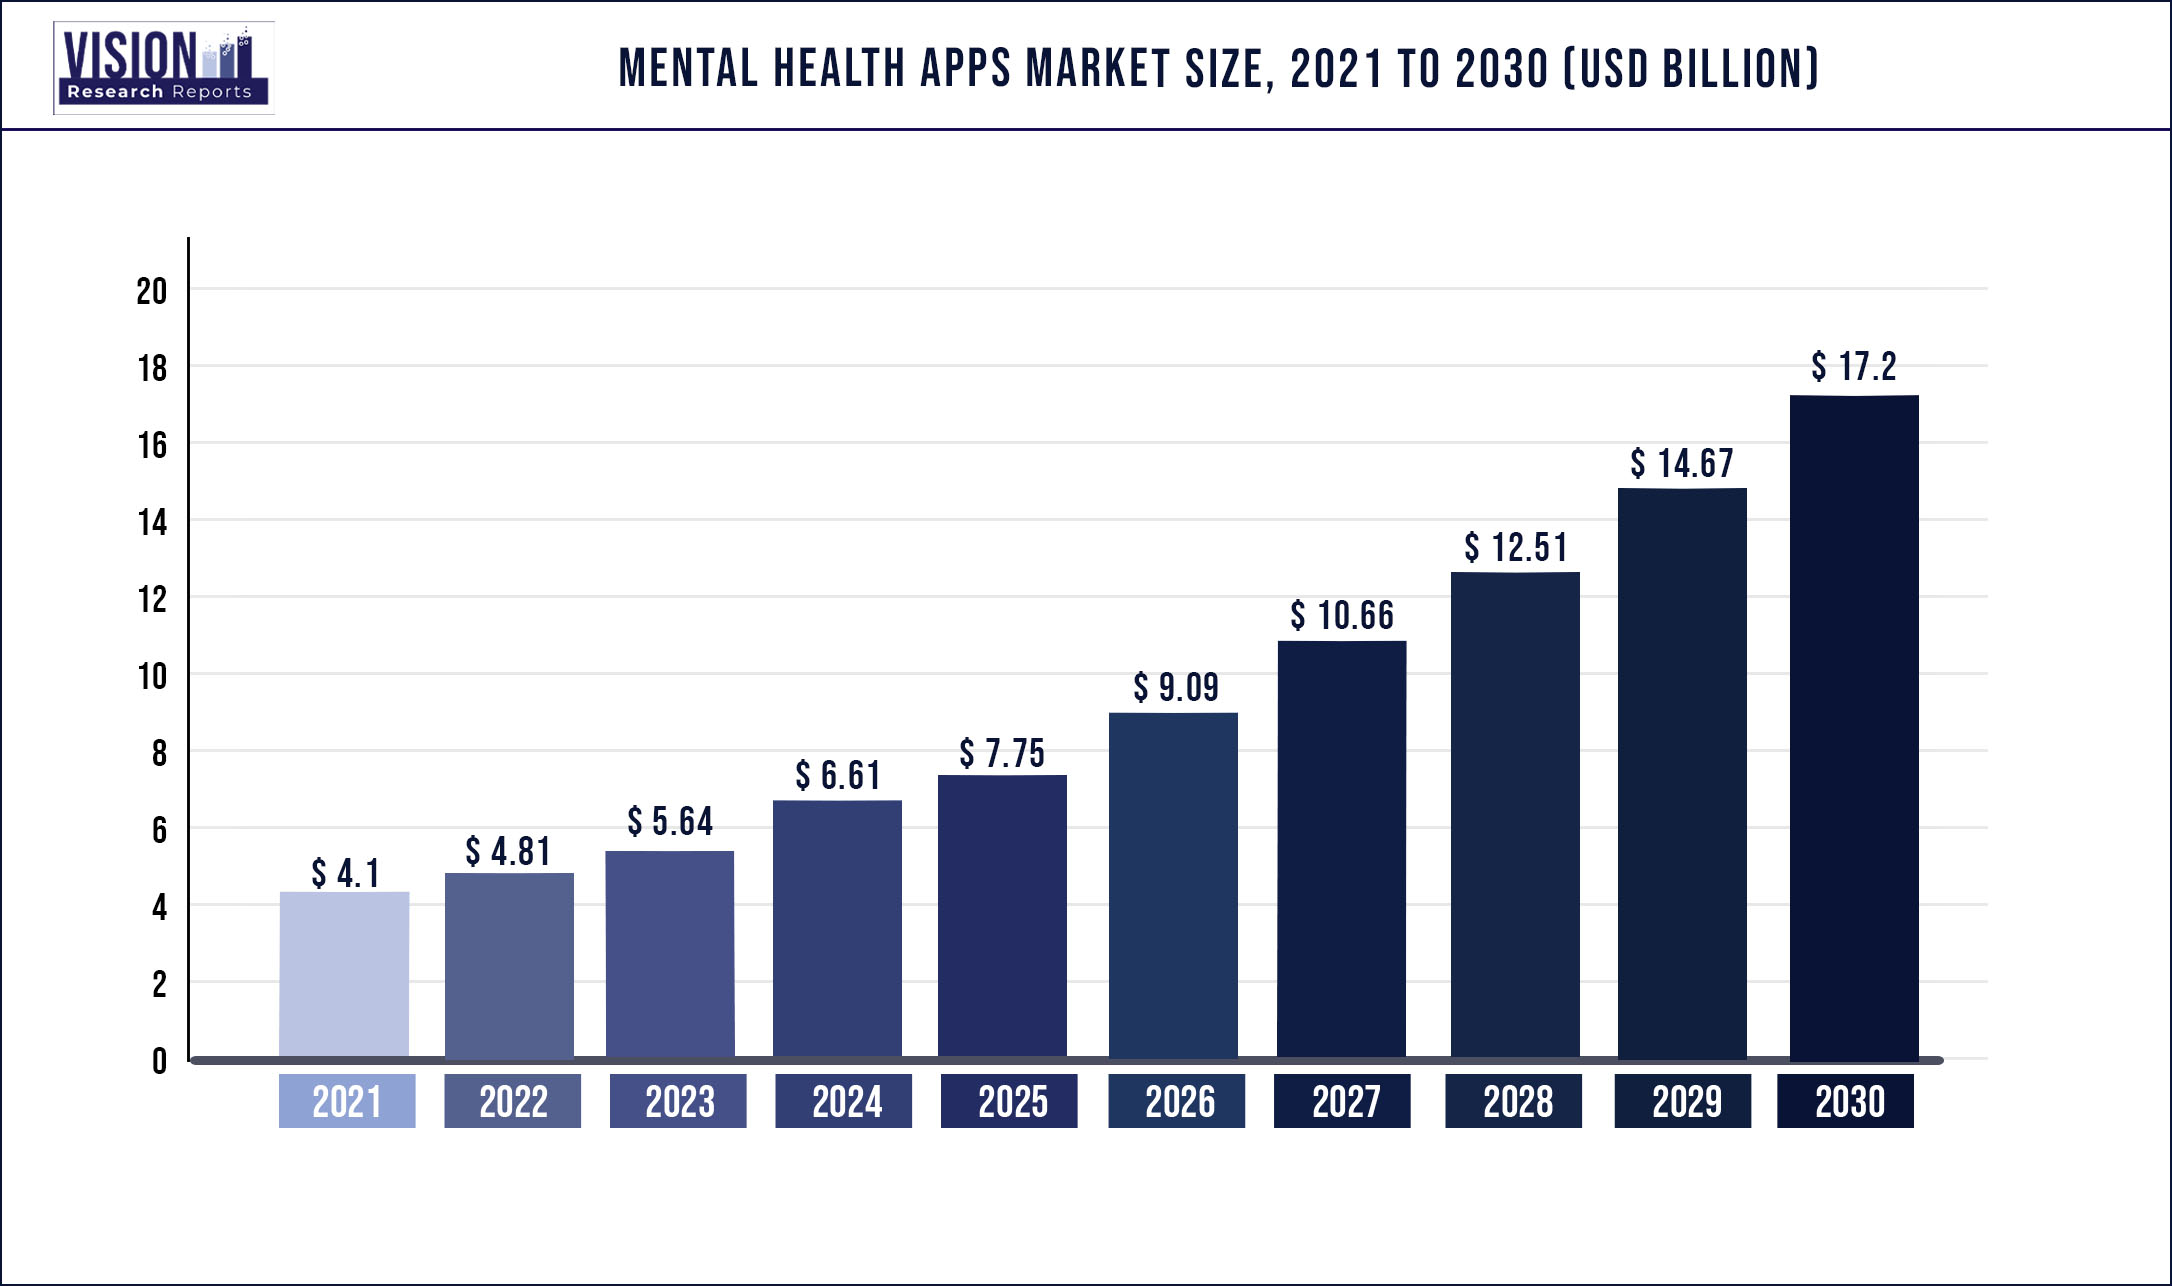 Mental Health Apps Market Size 2021 to 2030